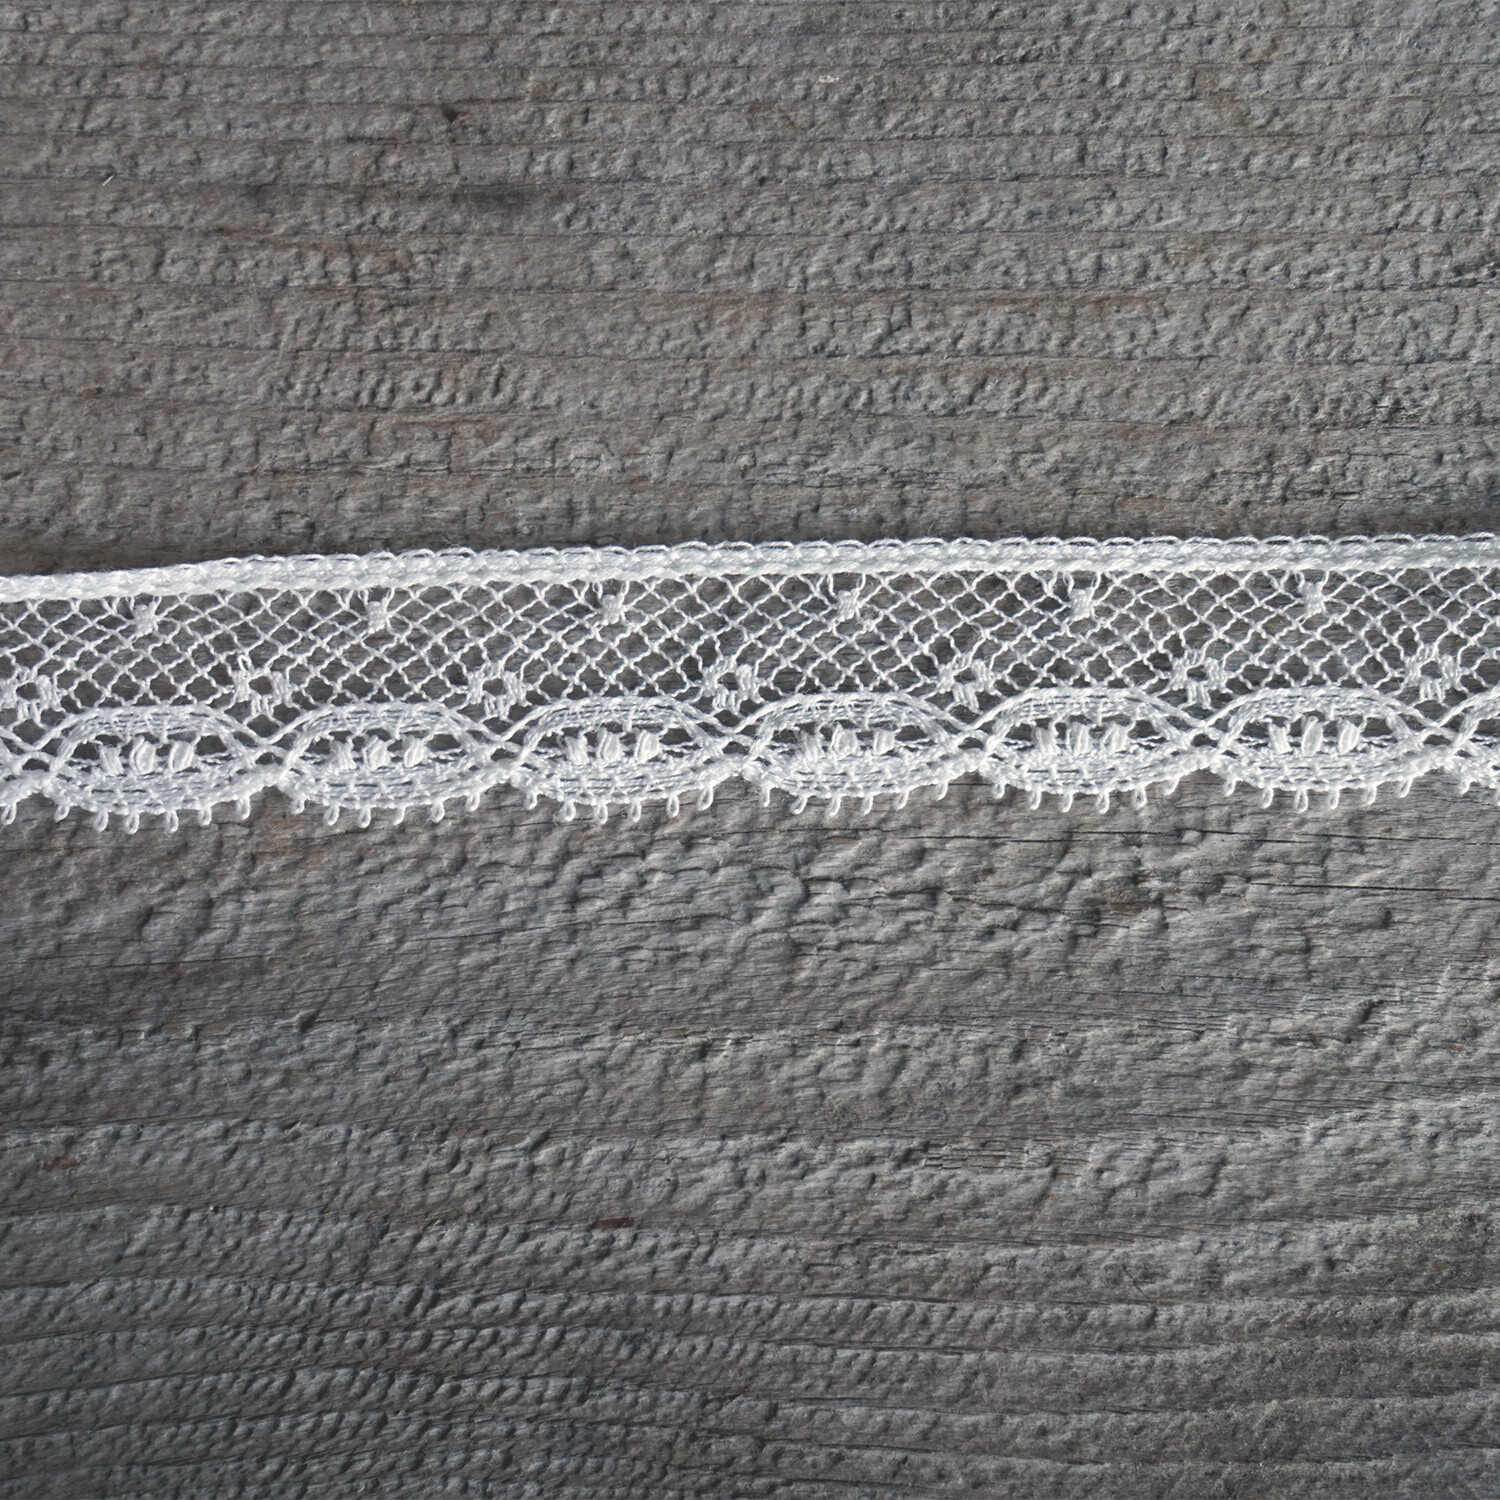 1 1/2 wide lace edging